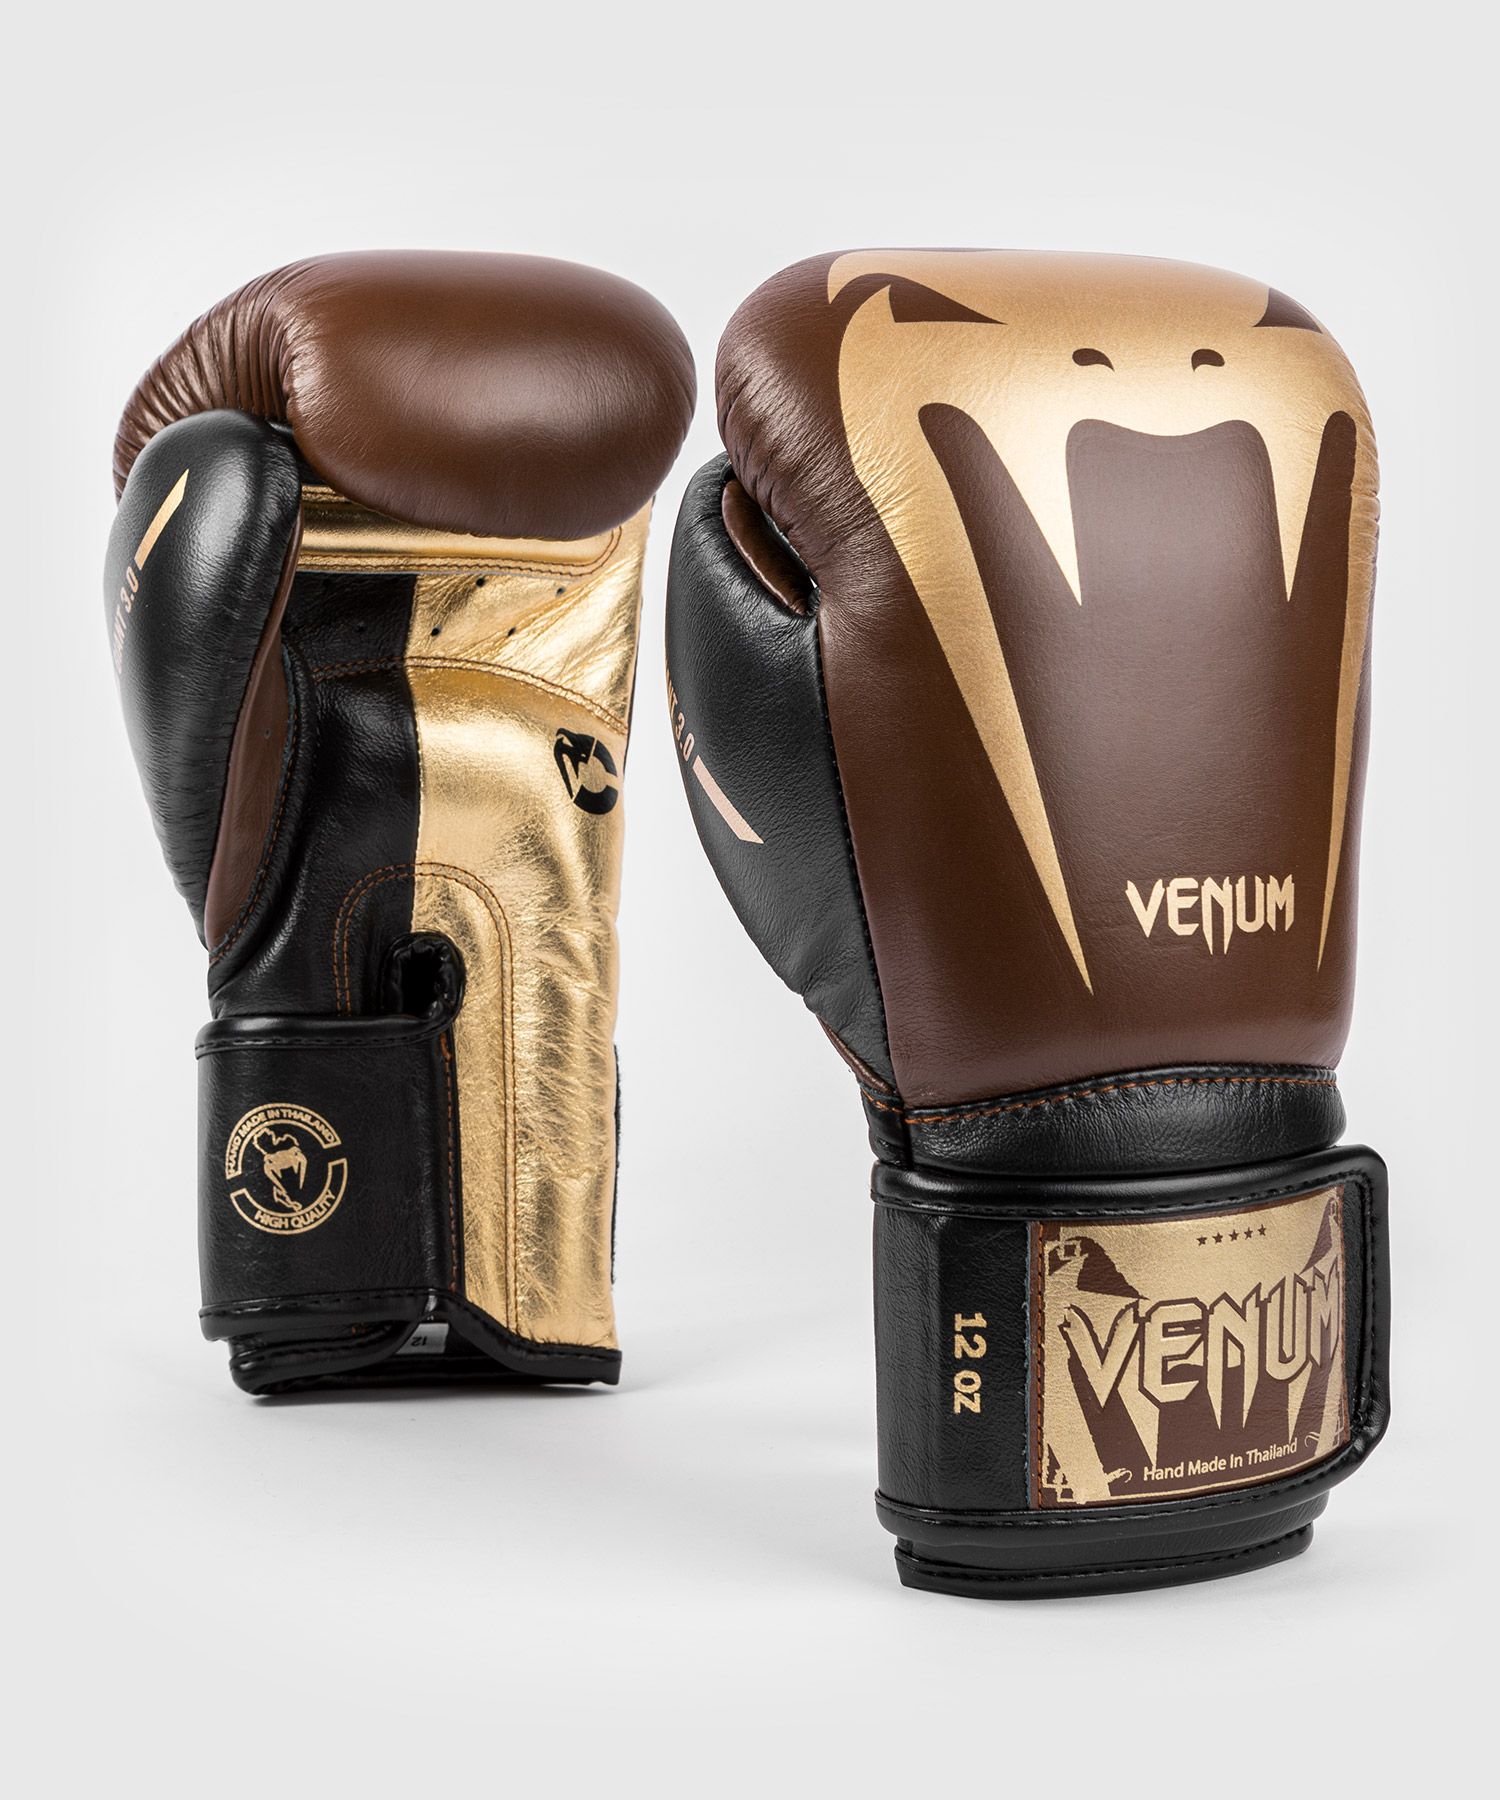 Venum Giant 3.0 Boxing Gloves Limited Edition - Brown